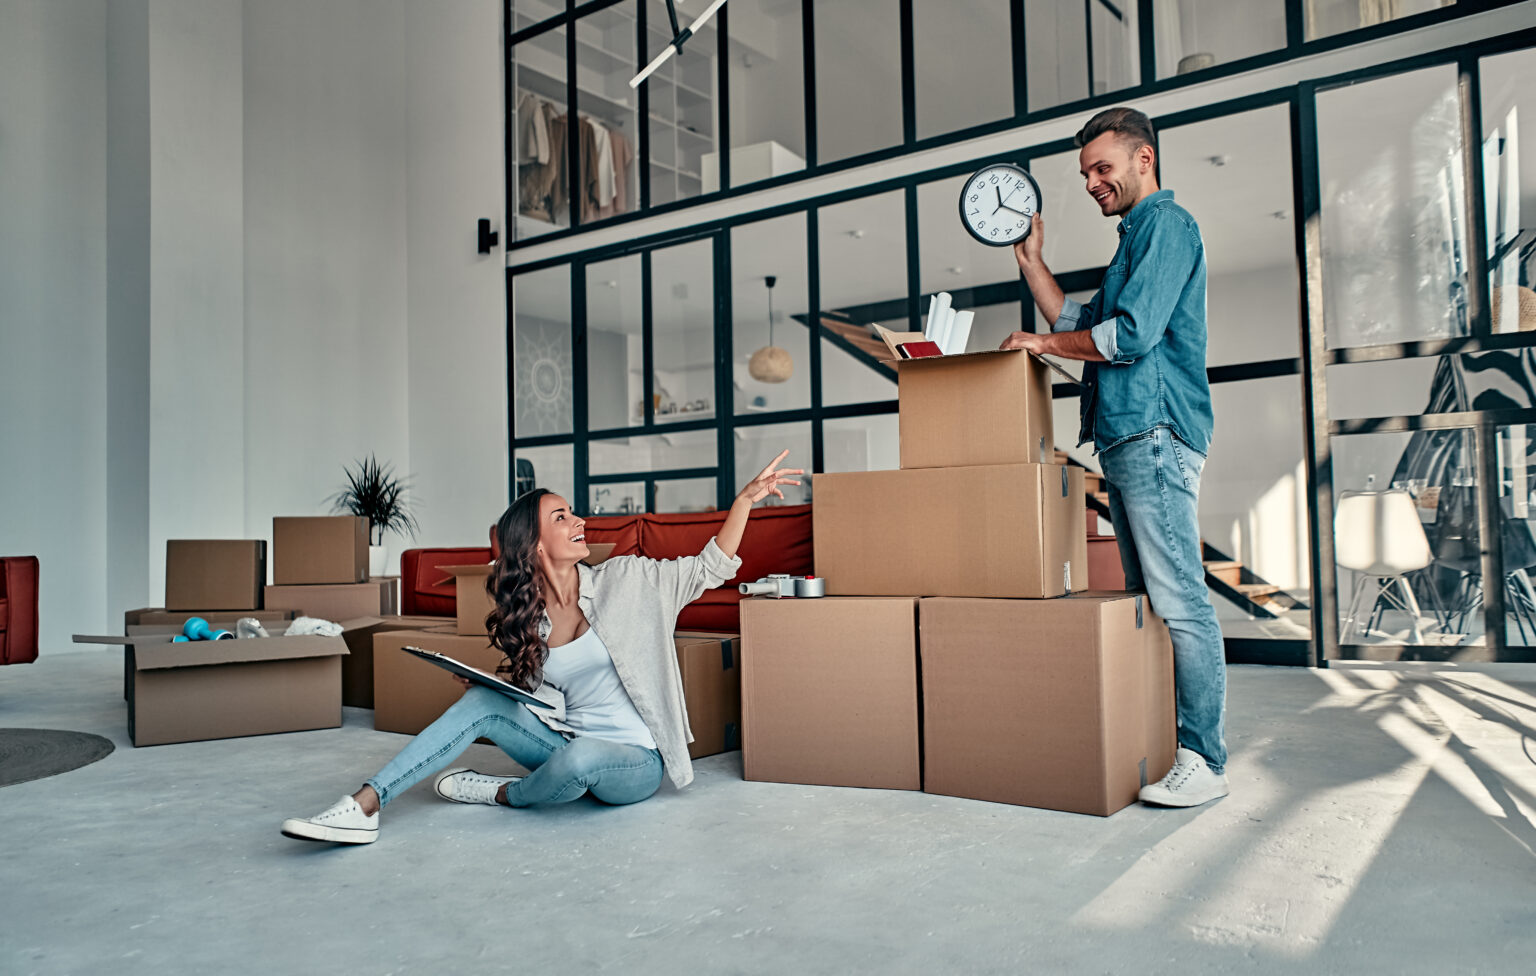 Packing Supplies: The Top Essentials When Moving